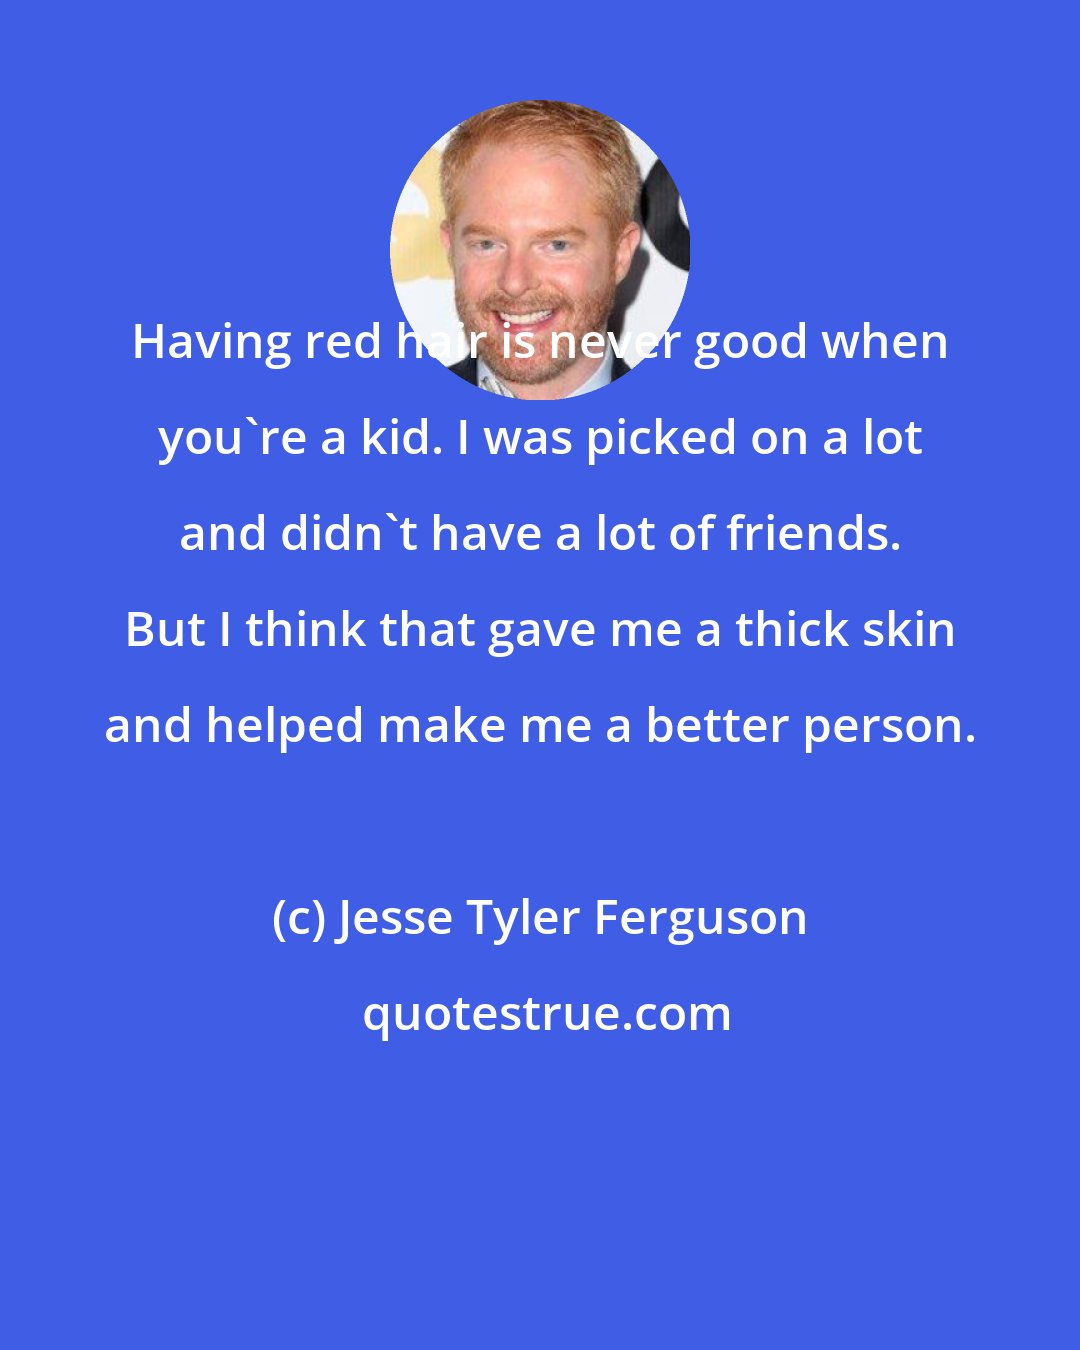 Jesse Tyler Ferguson: Having red hair is never good when you're a kid. I was picked on a lot and didn't have a lot of friends. But I think that gave me a thick skin and helped make me a better person.